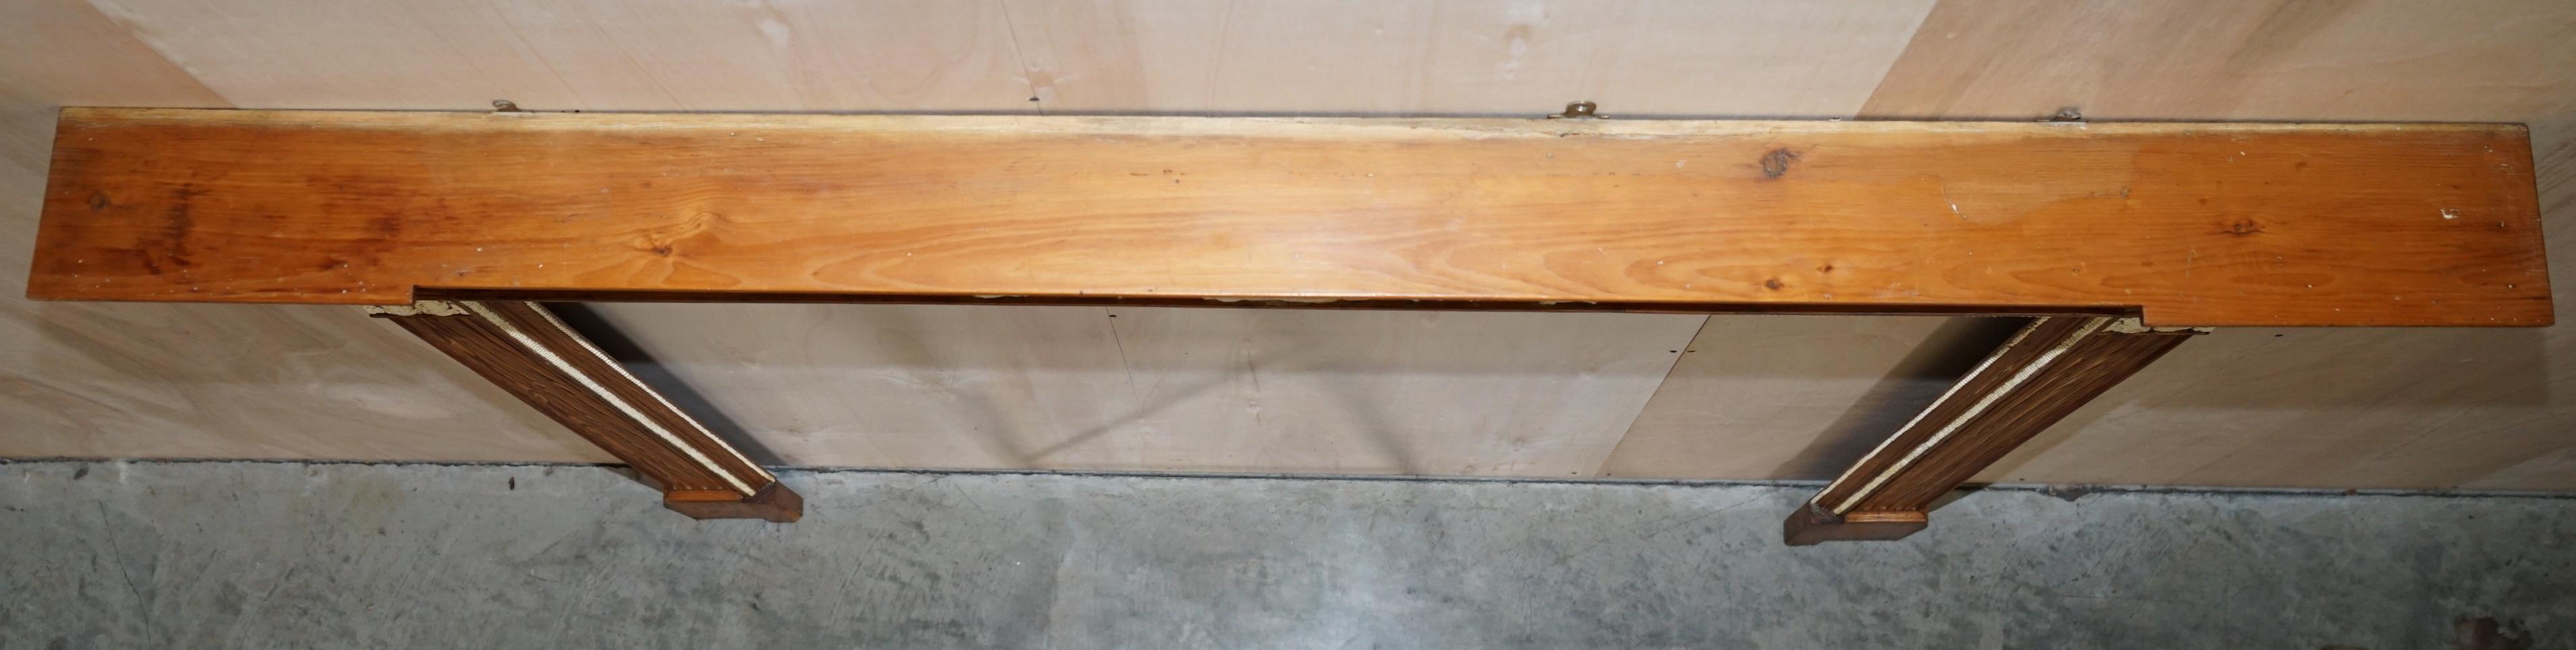 Antique Victorian Pitch Pine & Gesso Carved Fire Surround Fireplace Mantlepiece For Sale 8